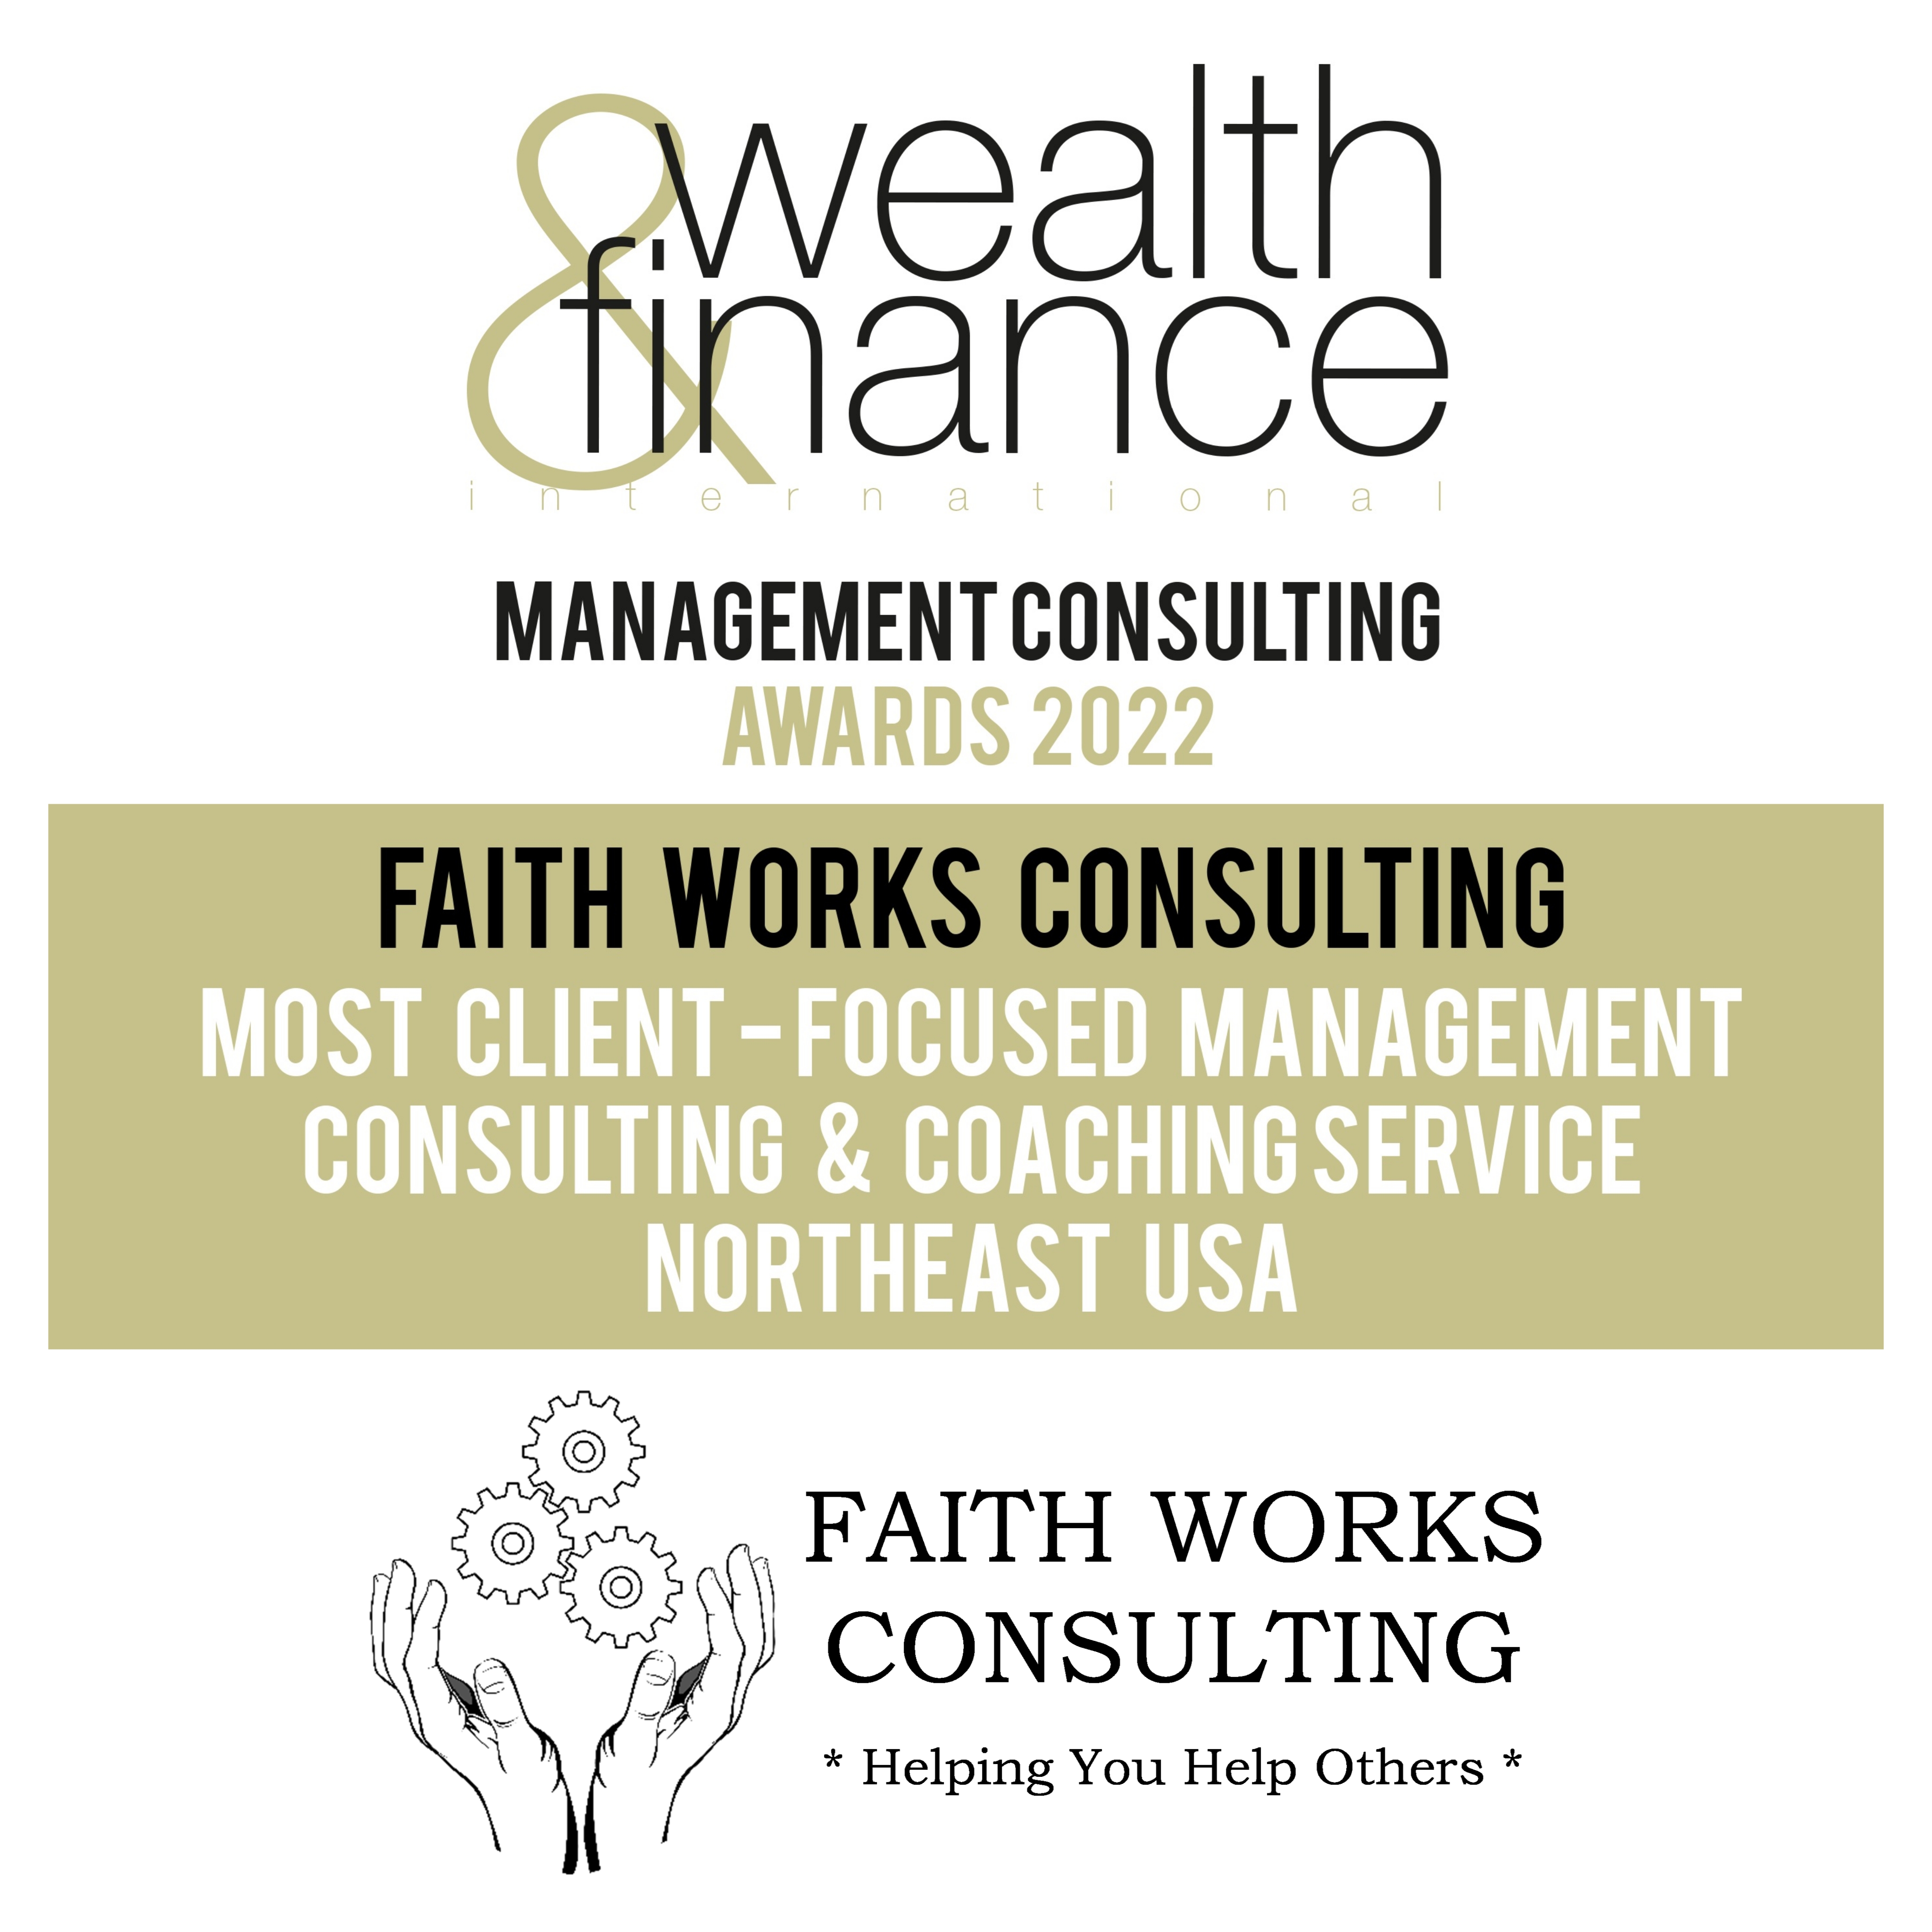 FAITH WORKS CONSULTING WINS CONSULTING AND COACHING AWARD